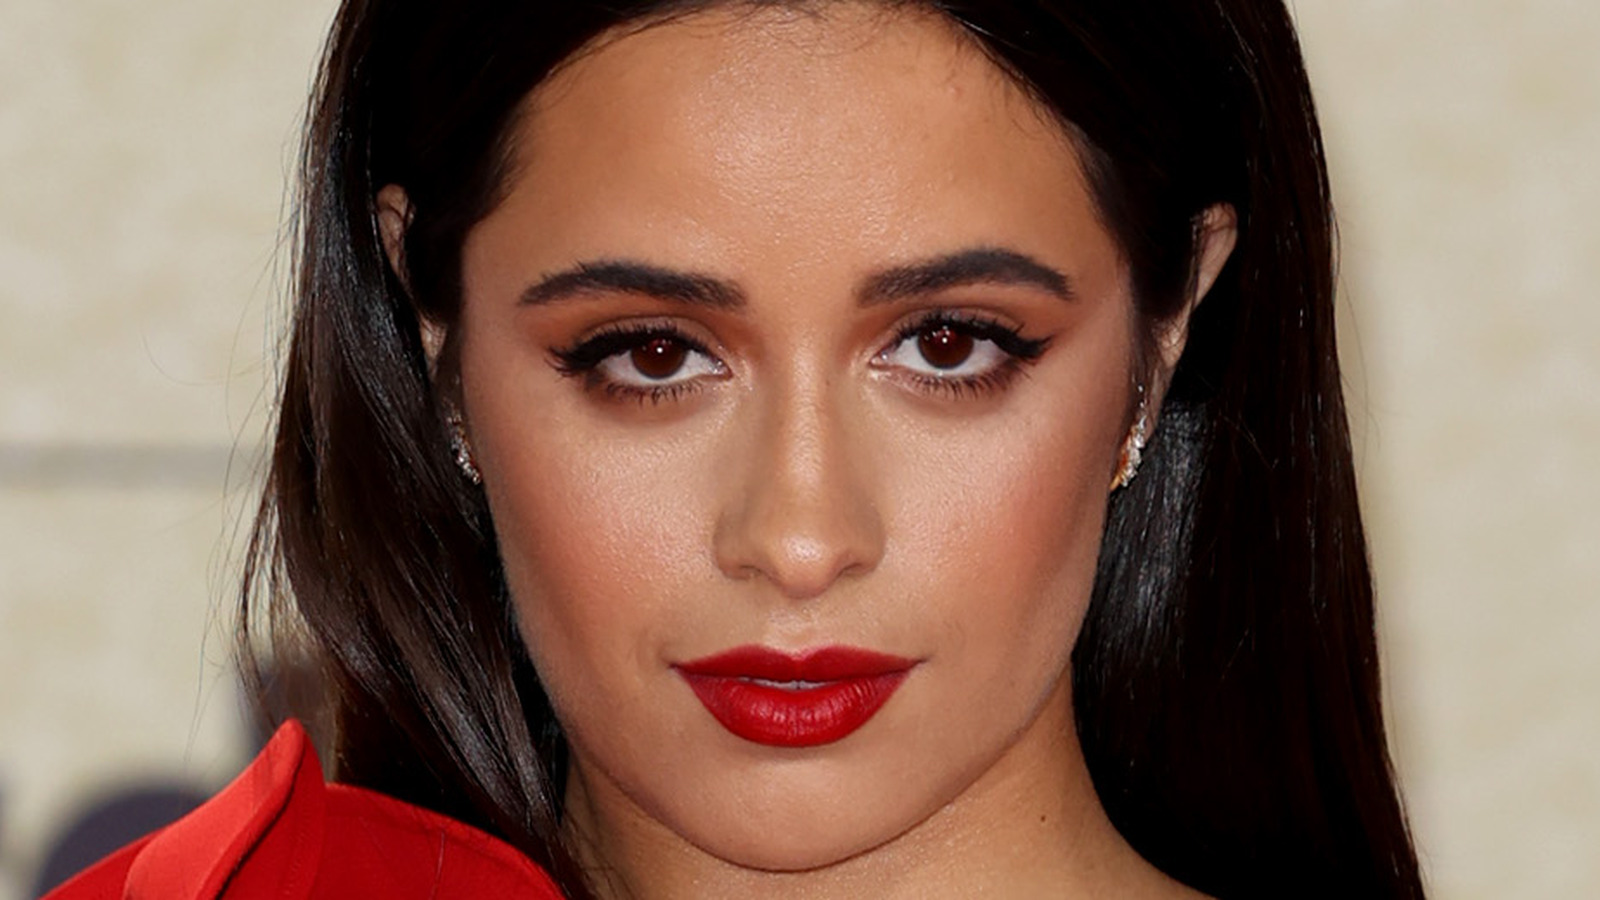 Here's What Camila Cabello Looks Like Real Life Vs. Instagram